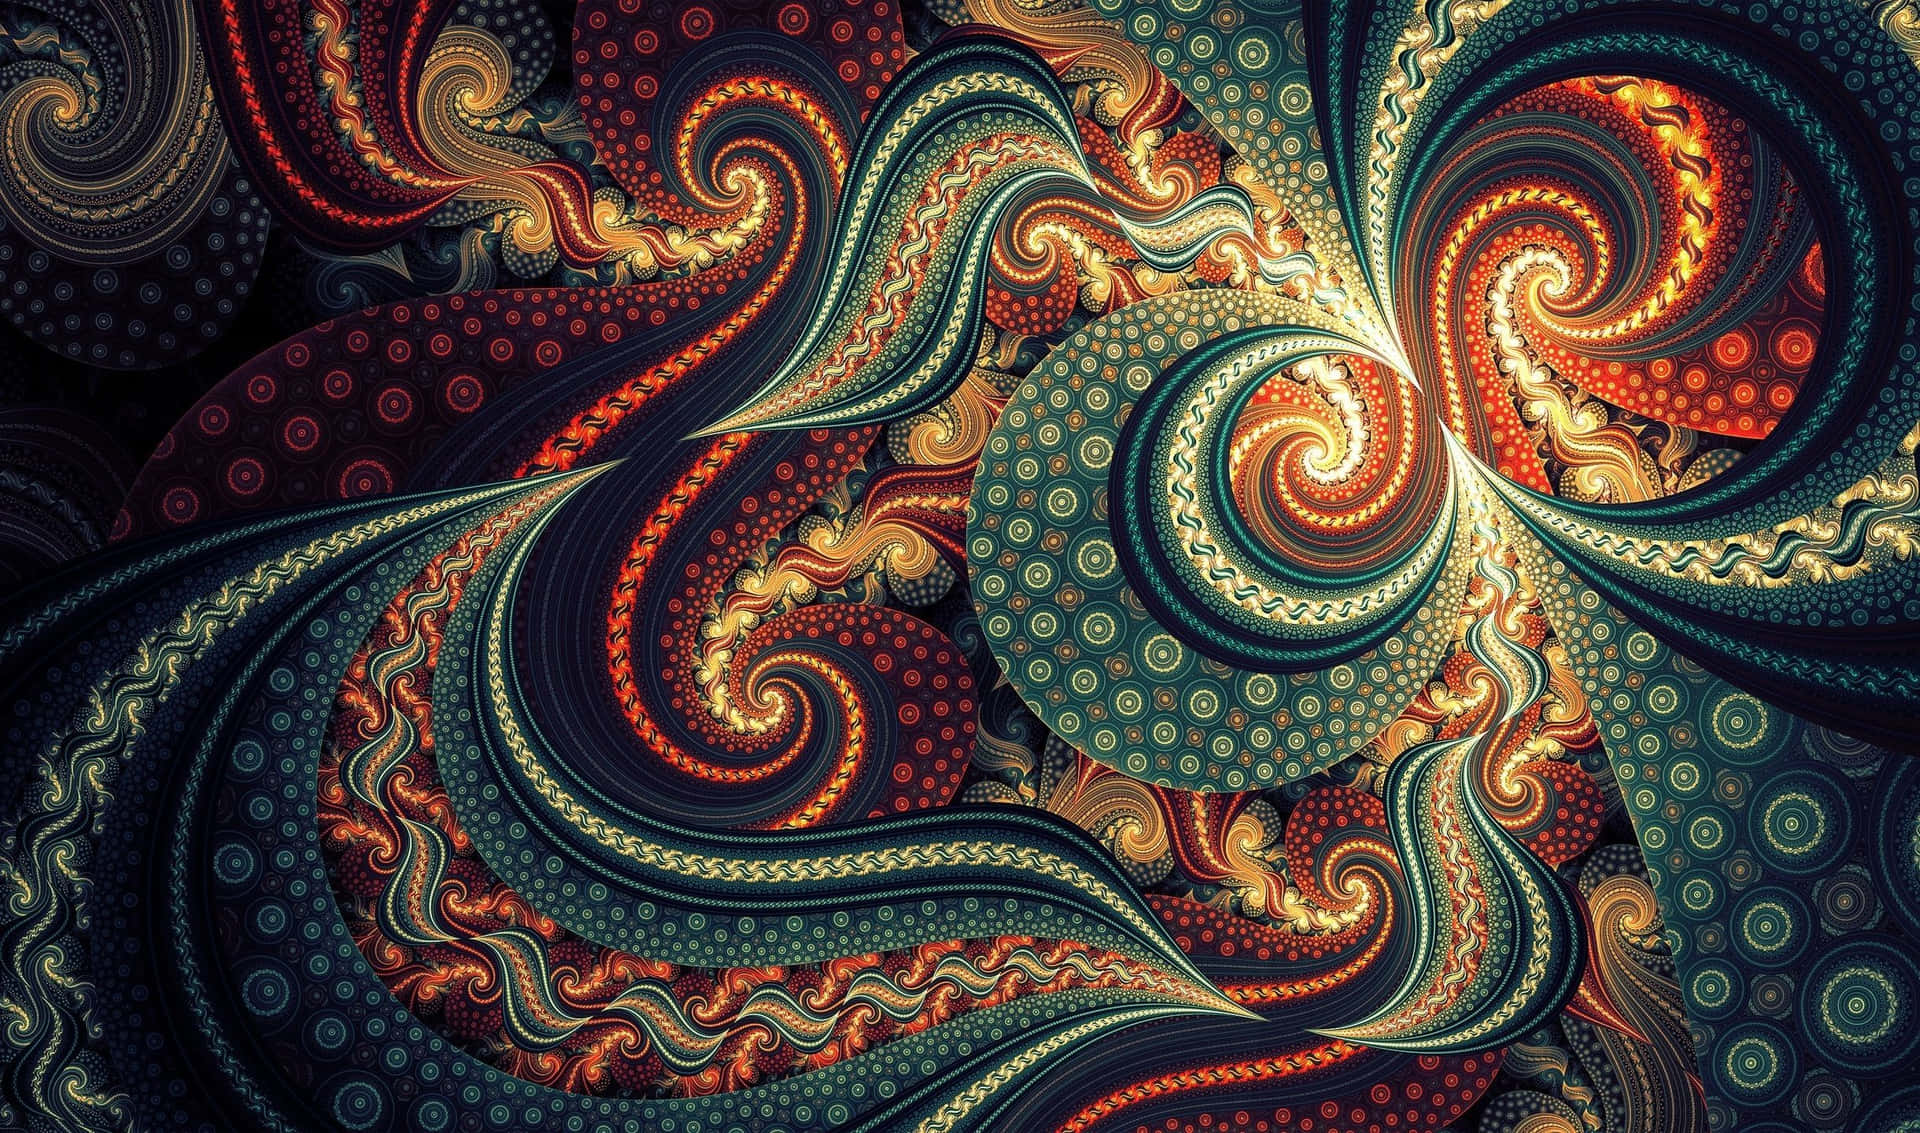 A Colorful Abstract Design With Swirls And Swirls